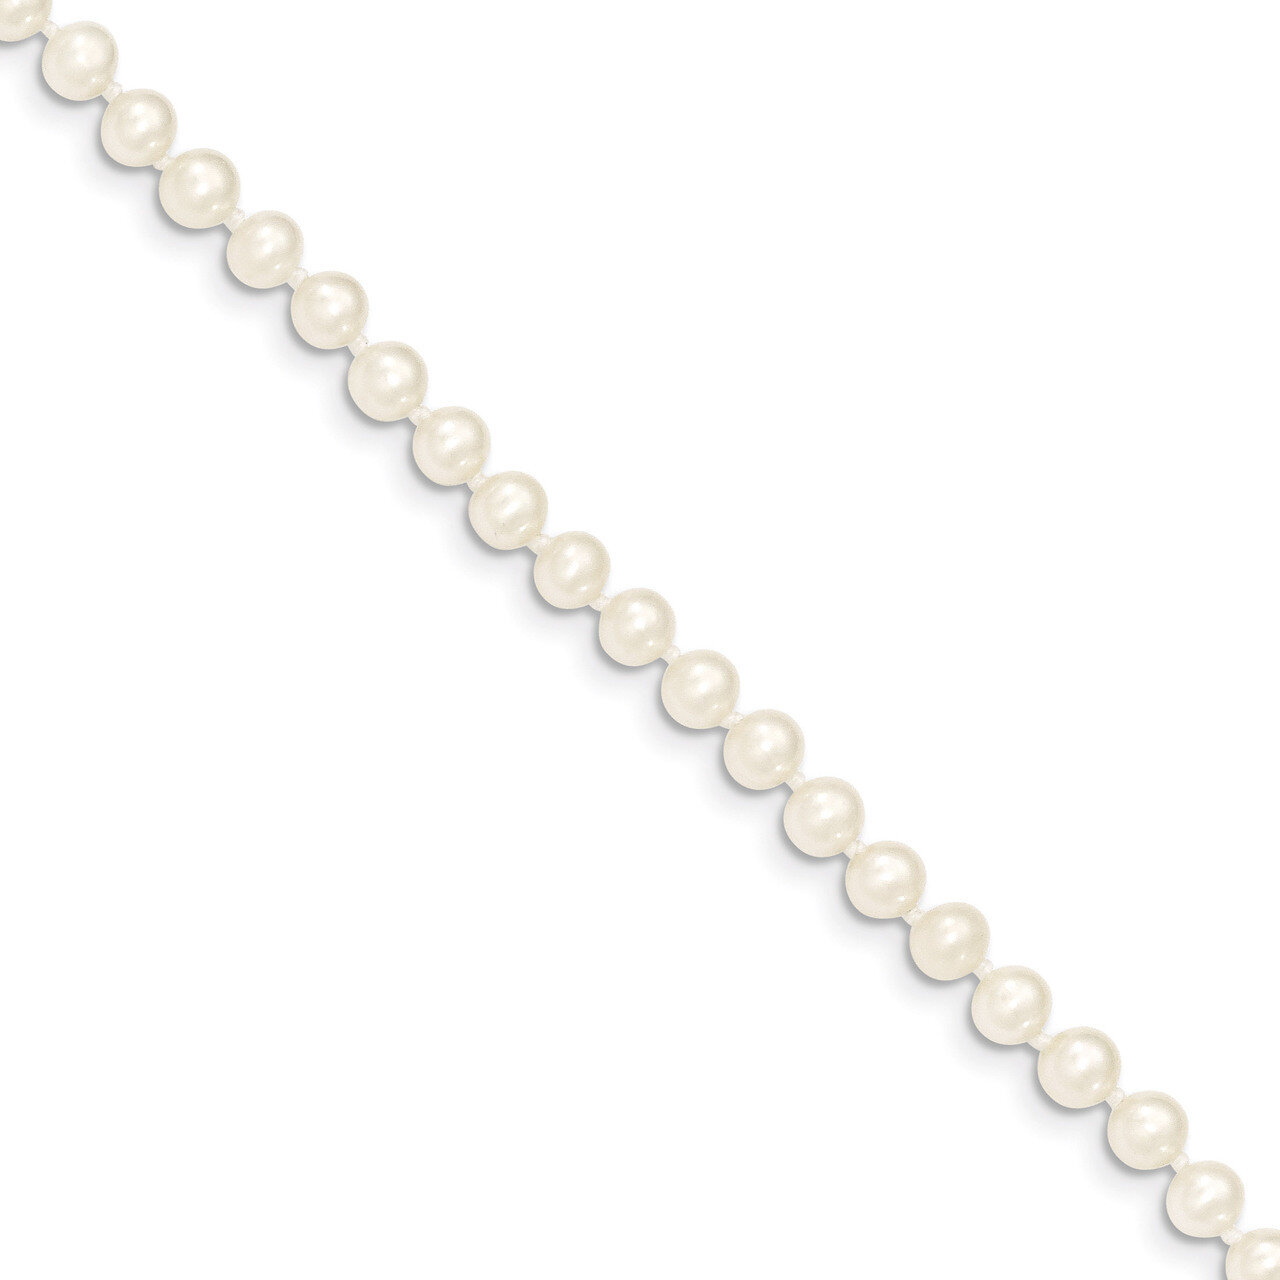 4-5mm White Cultured Near Round Pearl Necklace 20 Inch 14k Gold WPN040-20